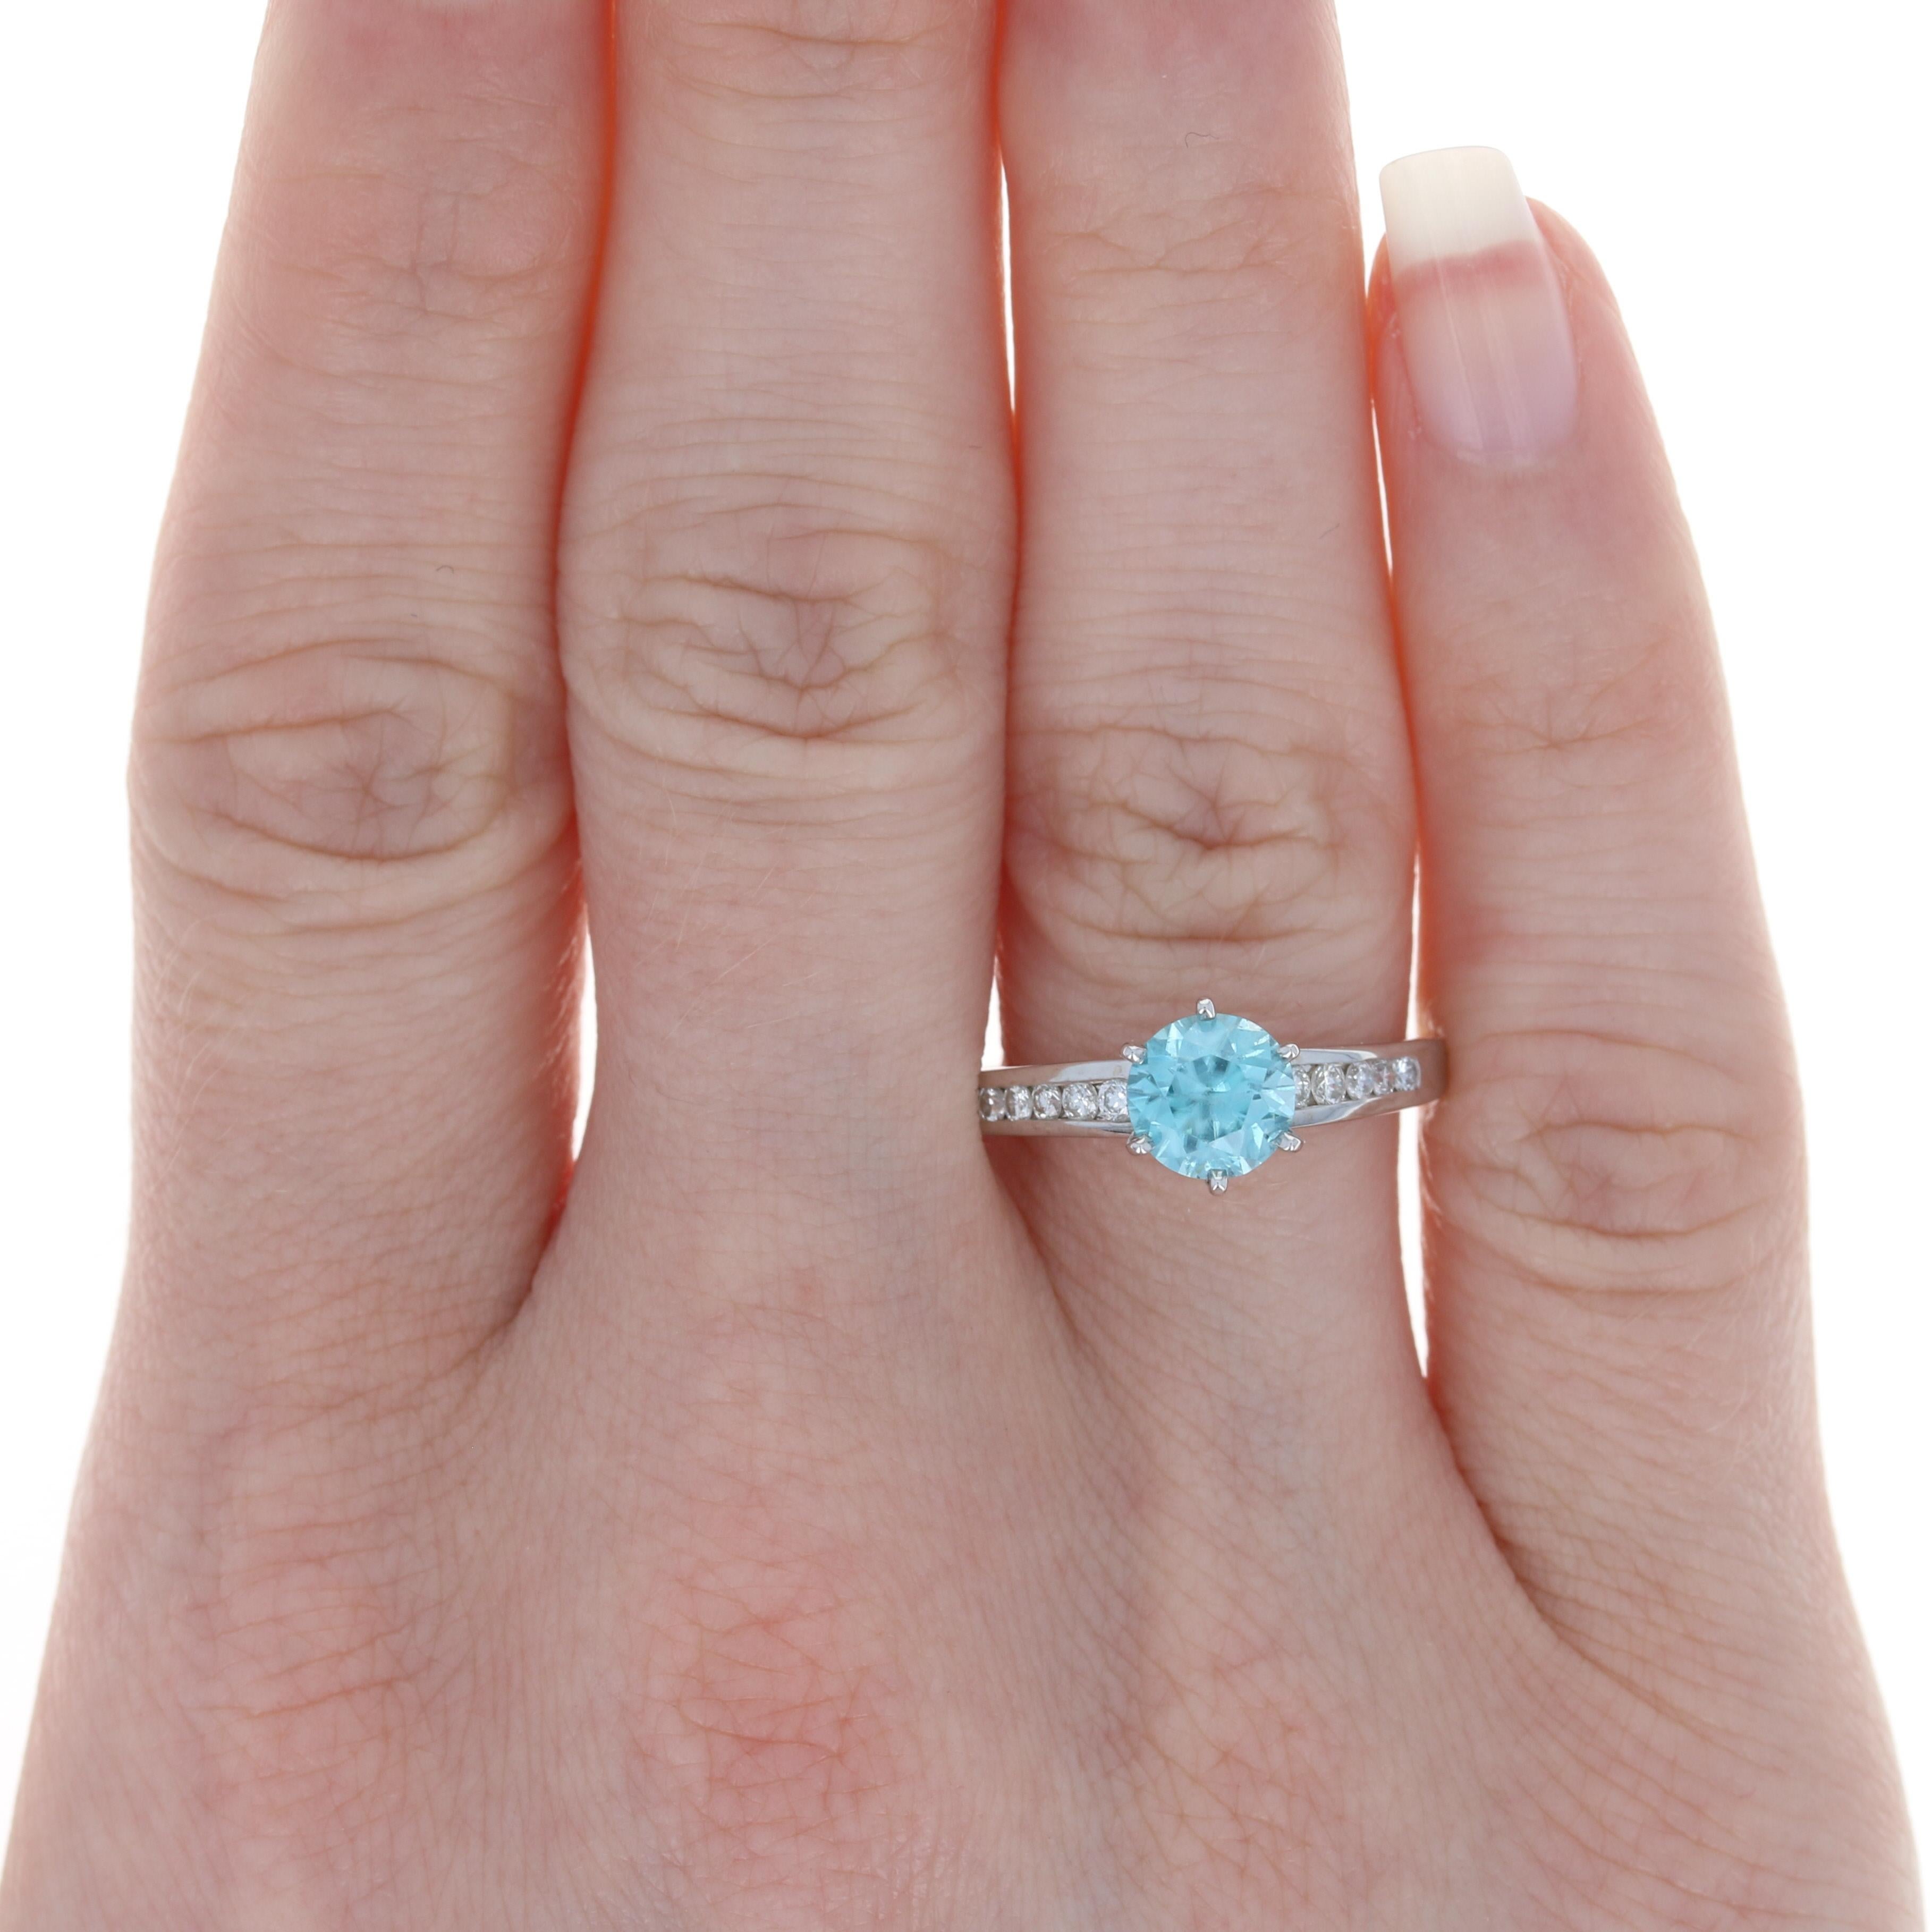 Size: 7 3/4
Sizing Fee: Down 2 sizes for $20 or Up 2 sizes for $25

Metal Content: 14k White Gold

Stone Information: 
Genuine Zircon
Carat: 1.59ct (weighed)
Cut: Round Brilliant
Color: Blue
Diameter: 6.5mm 

Natural Diamonds
Carats: .24ctw
Cut: